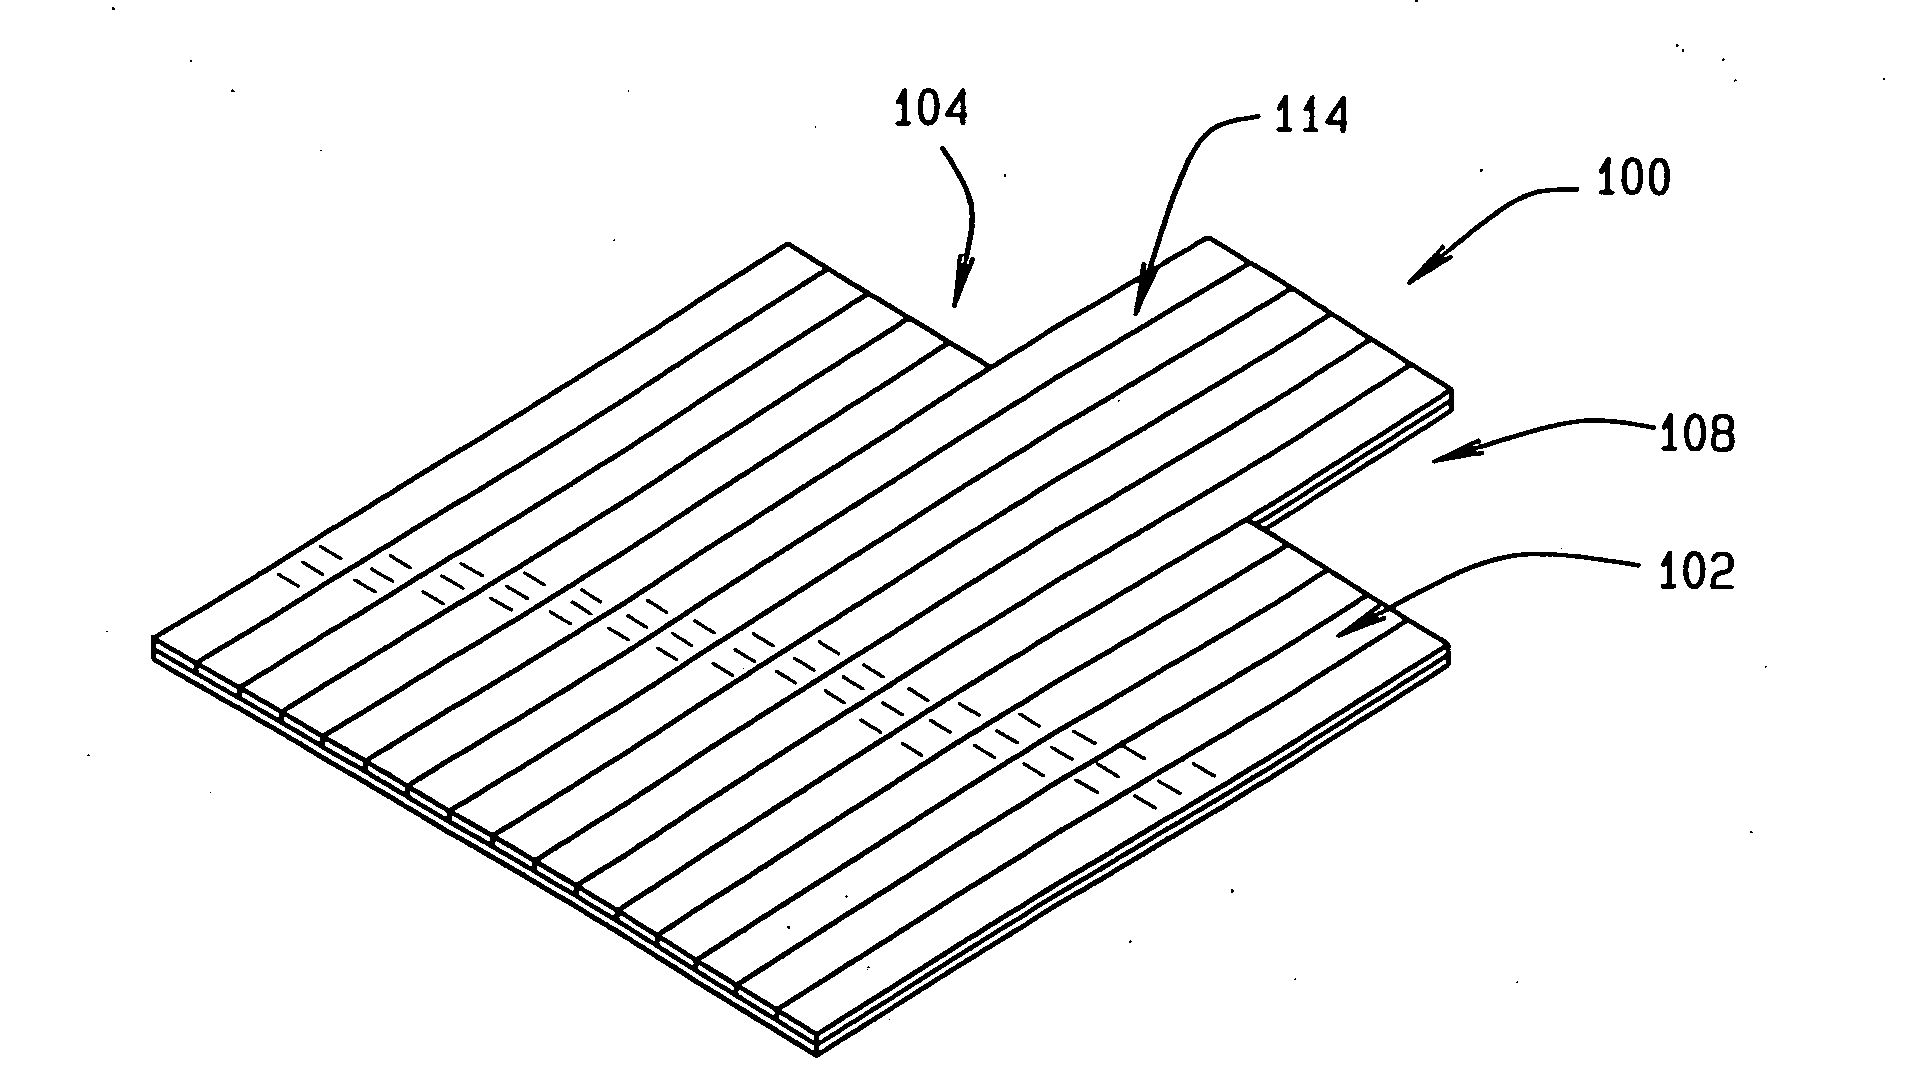 Foldable and flexible laminated mat